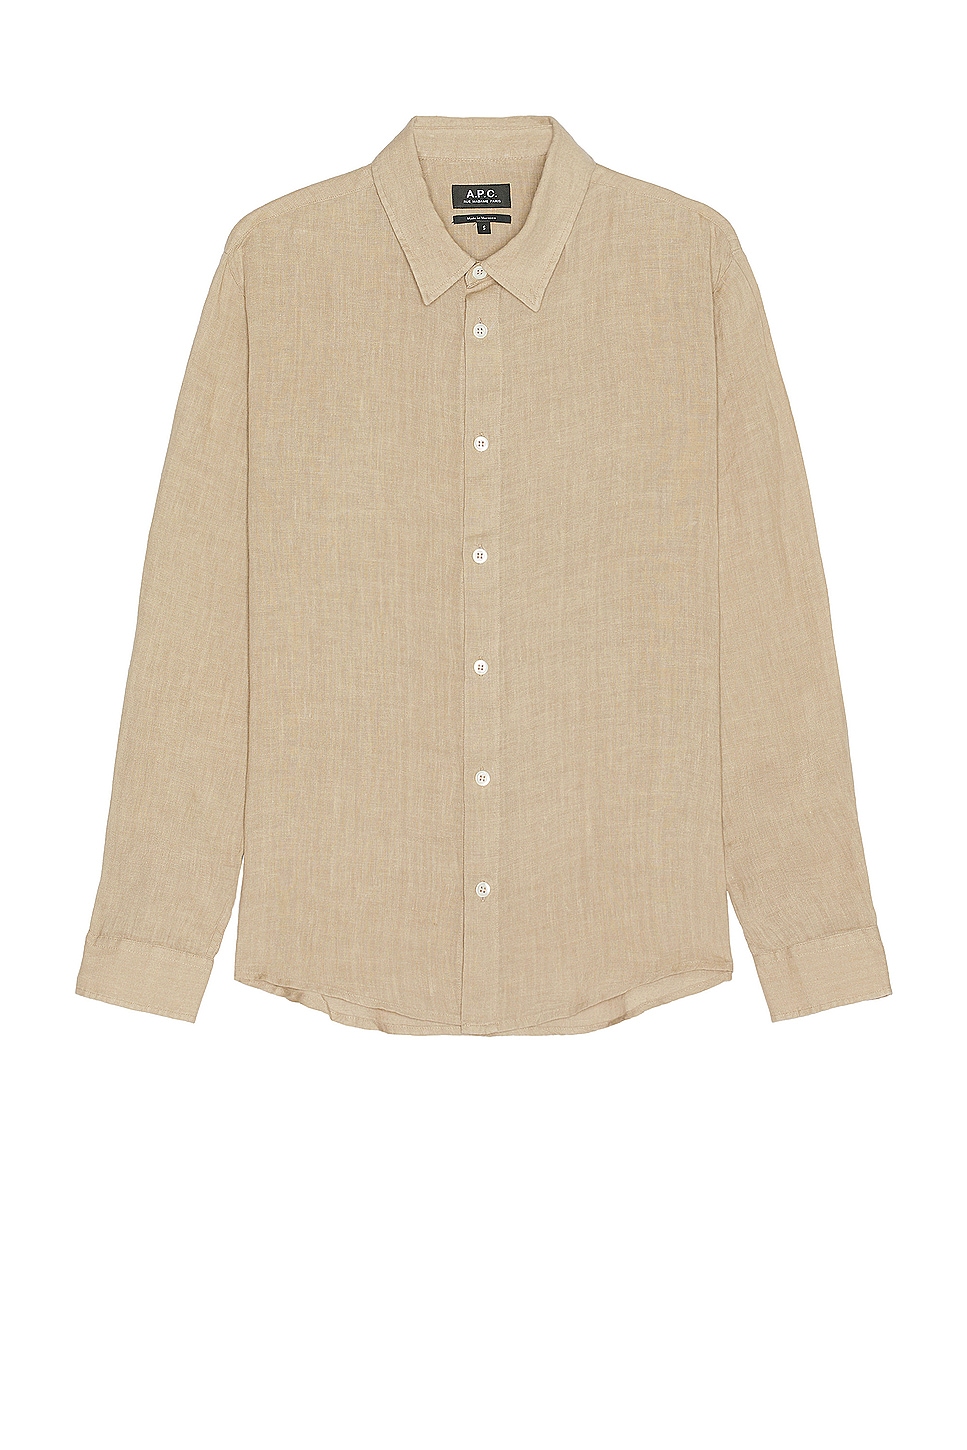 Image 1 of A.P.C. Chemise Cassel Logo in Beige